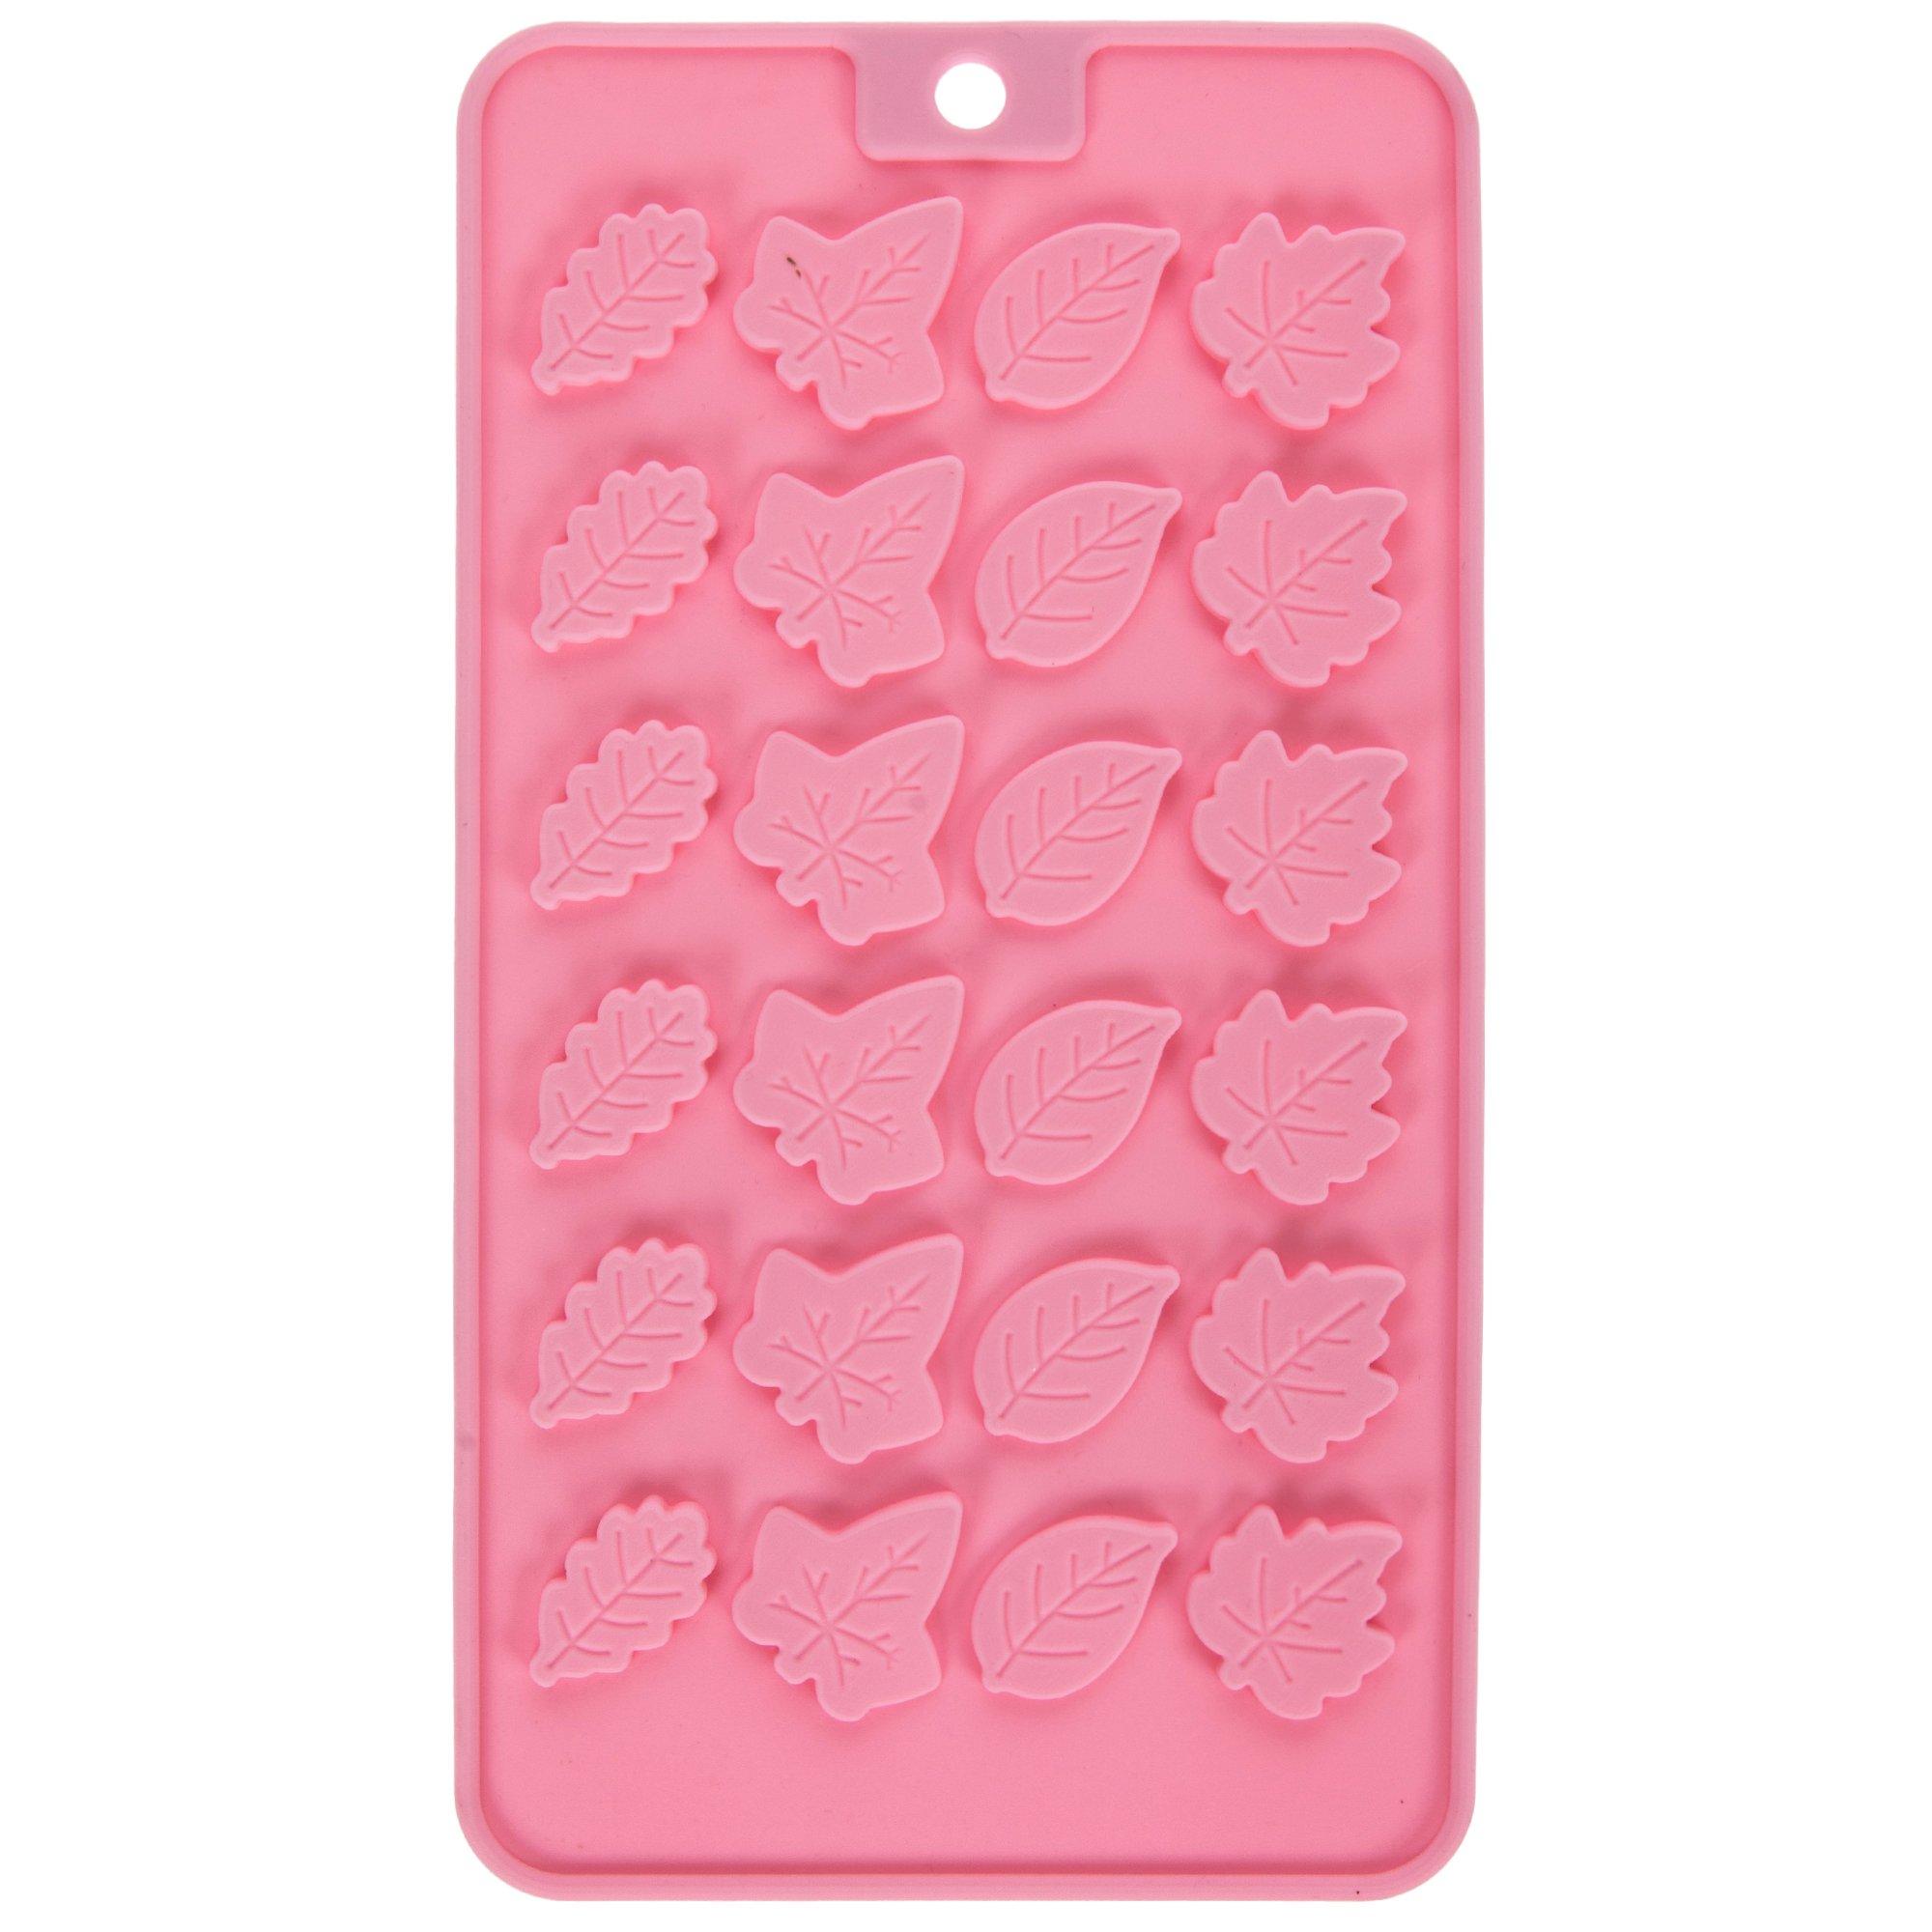 Leaves Silicone Candy Mold by Celebrate It®